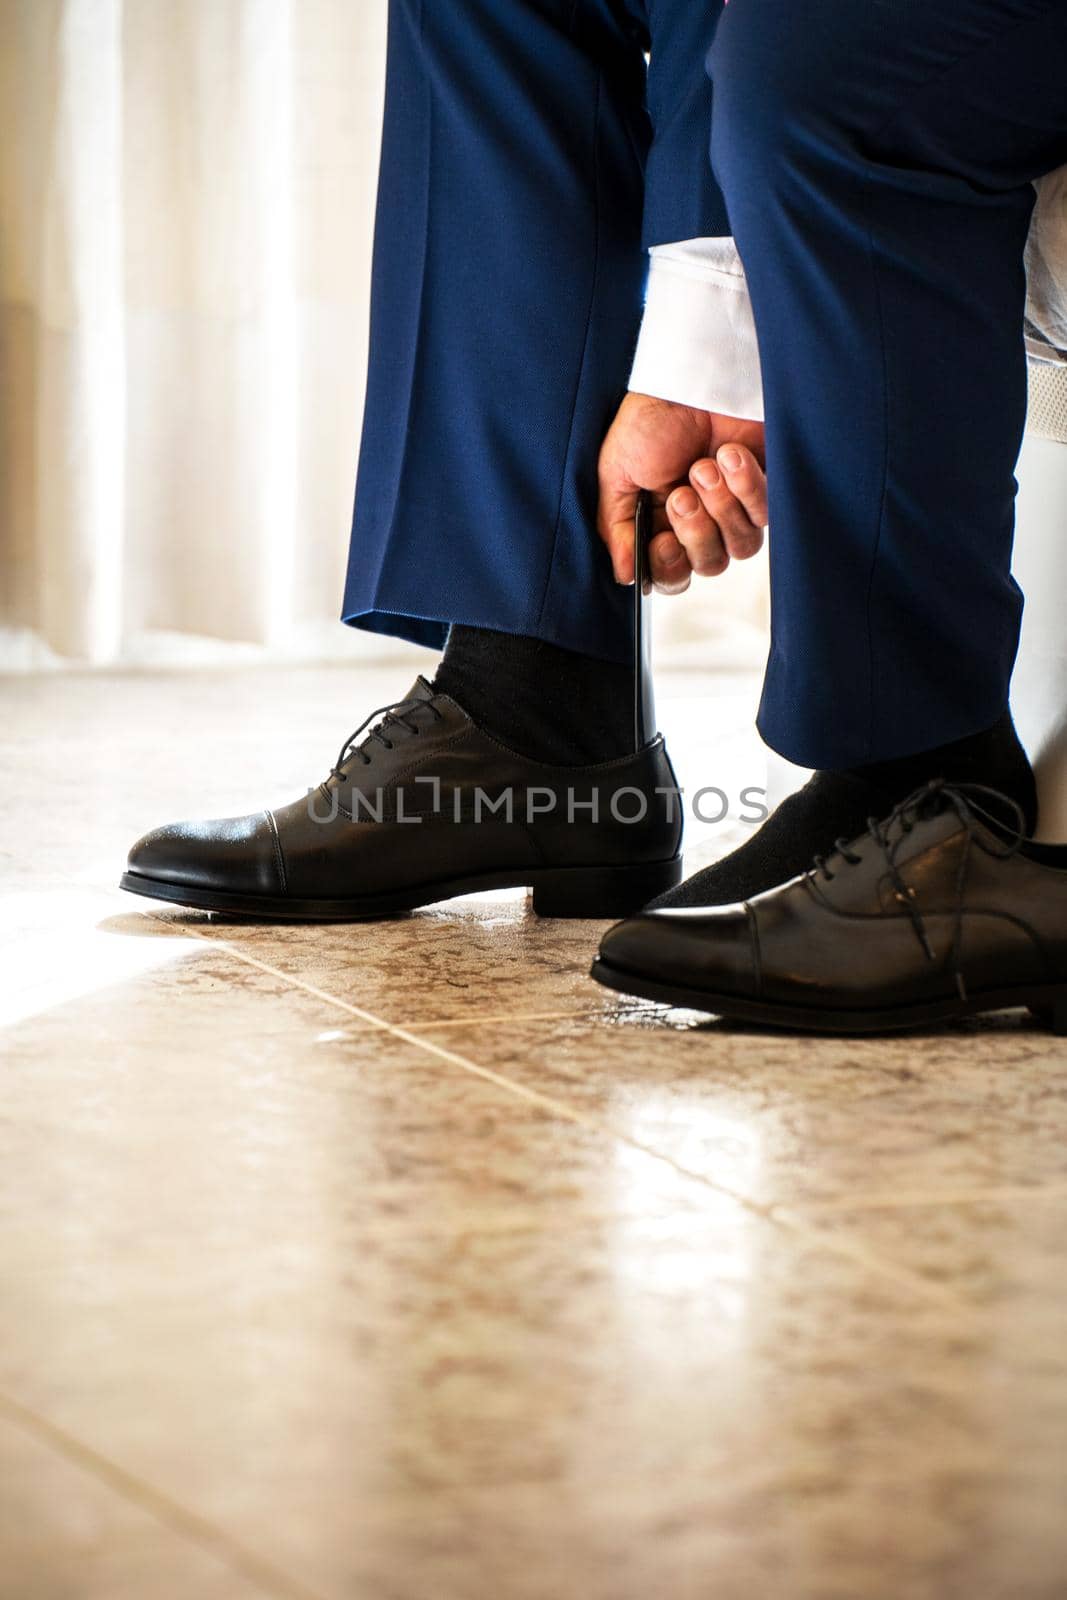 businessman clothes shoes, man getting ready for work,groom morning before wedding ceremony by Mareno